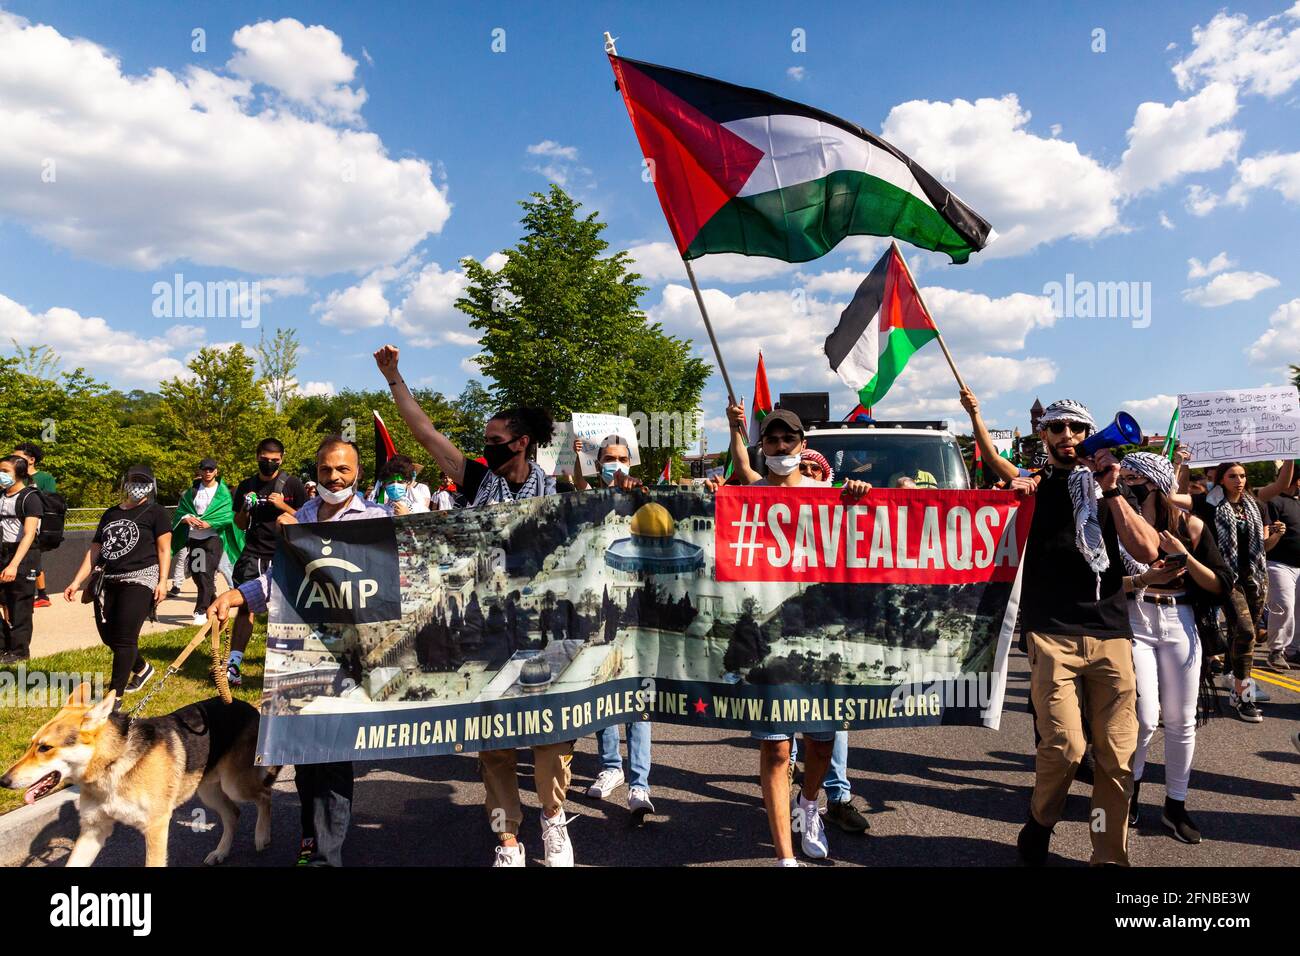 Washington, DC, USA. 15th May, 2021. Pictured: The lead banner at the March for Palestine, on the 73rd anniversary of the Nakba, Israel's seizure of Palestine in 1948. The date takes on greater significance this year as a result of Israel's invasion of Al Aqua mosque in Jerusalem and airstrikes in Gaza. Credit: Allison Bailey/Alamy Live News Stock Photo